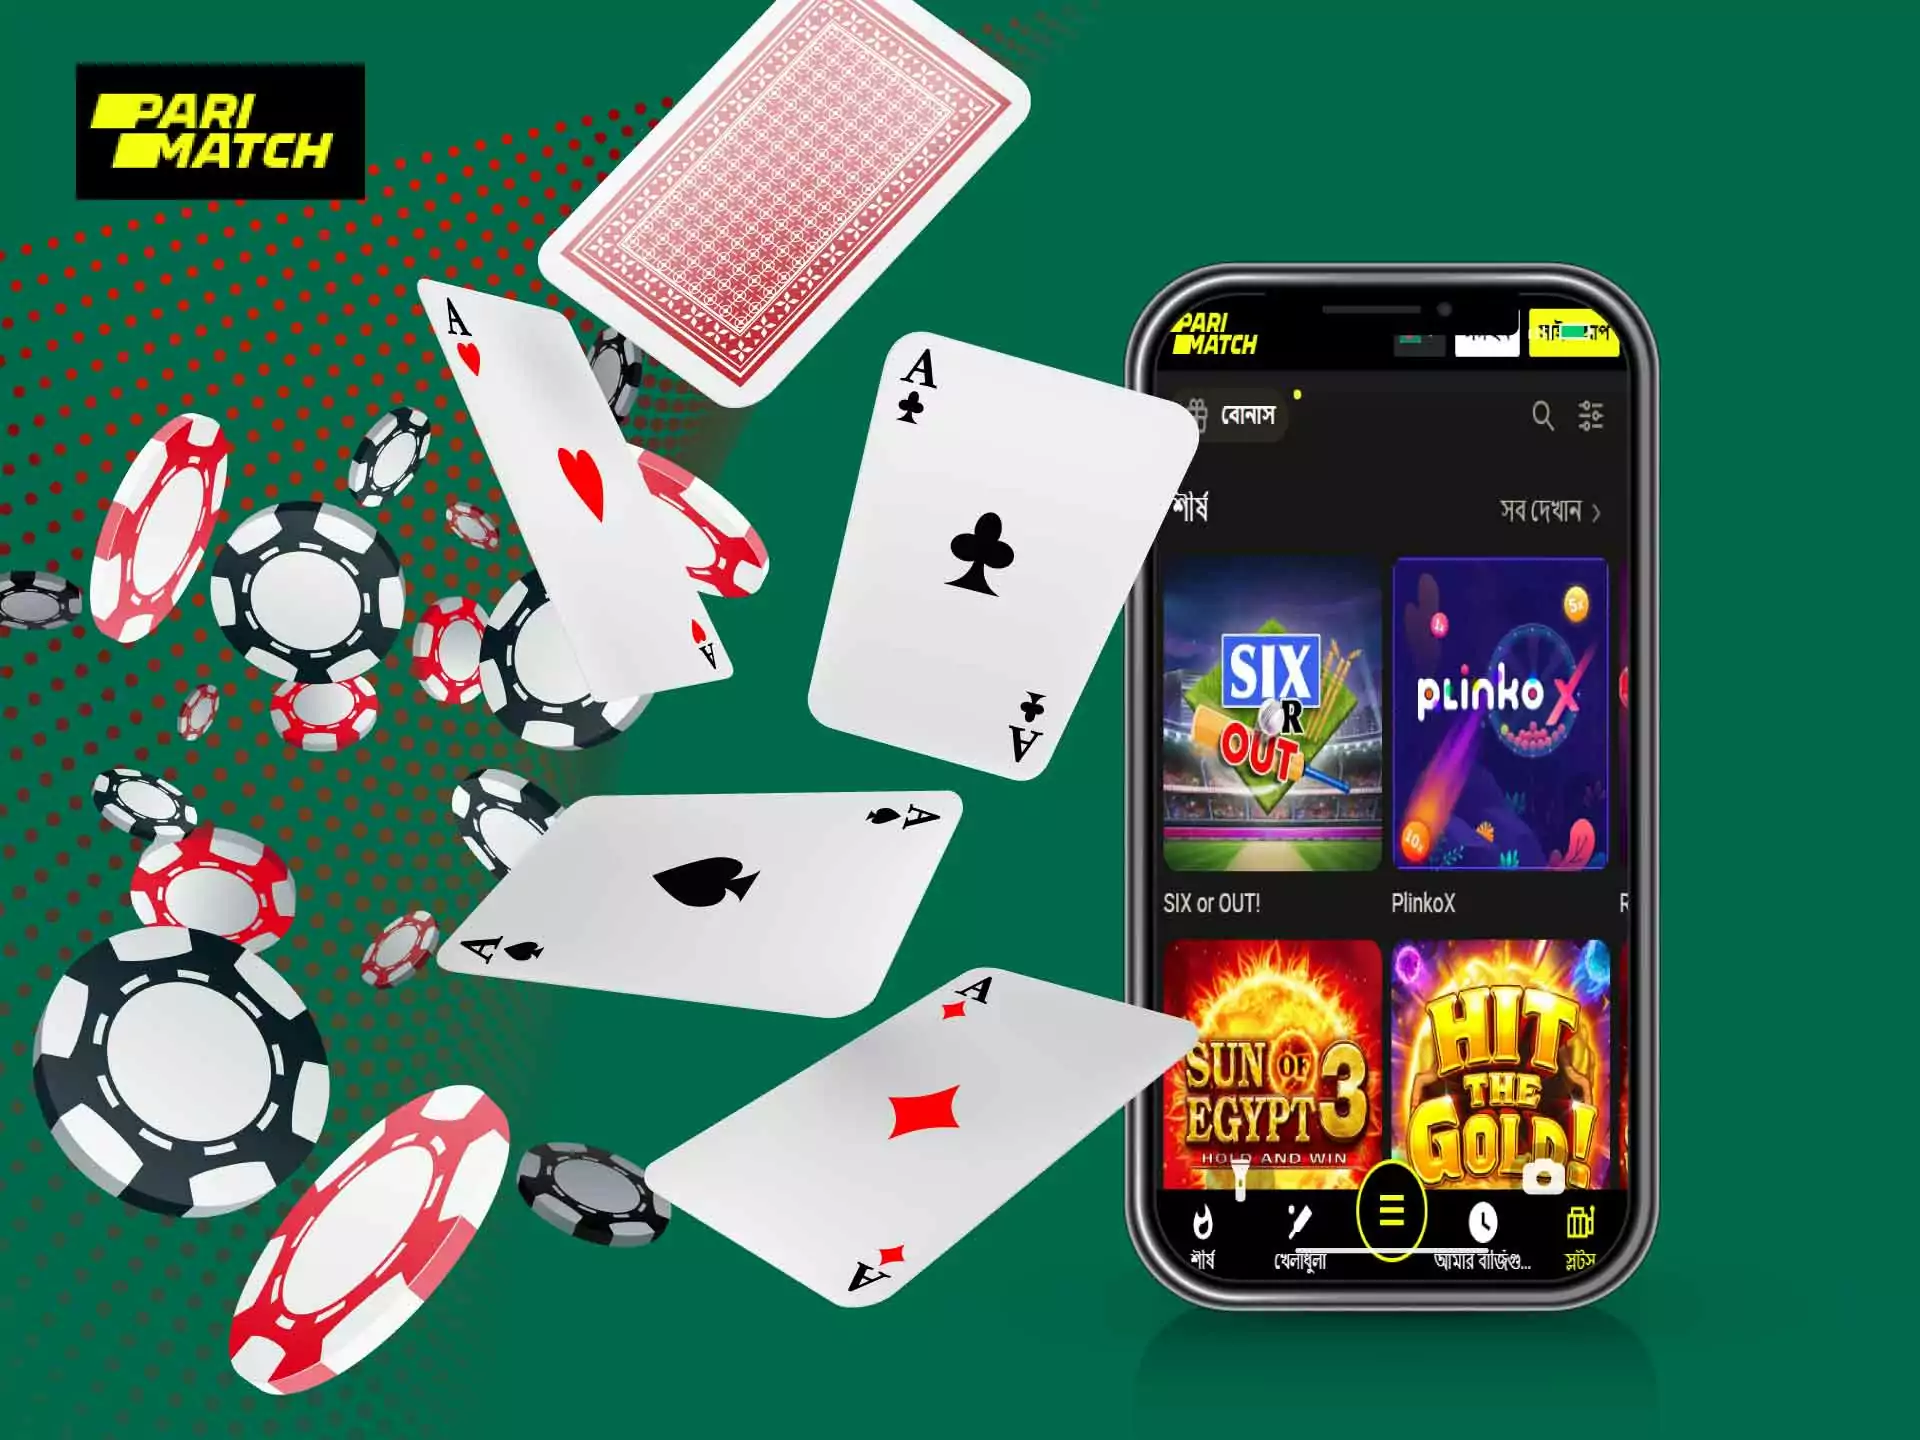 Play casino games in the Parimatch app.